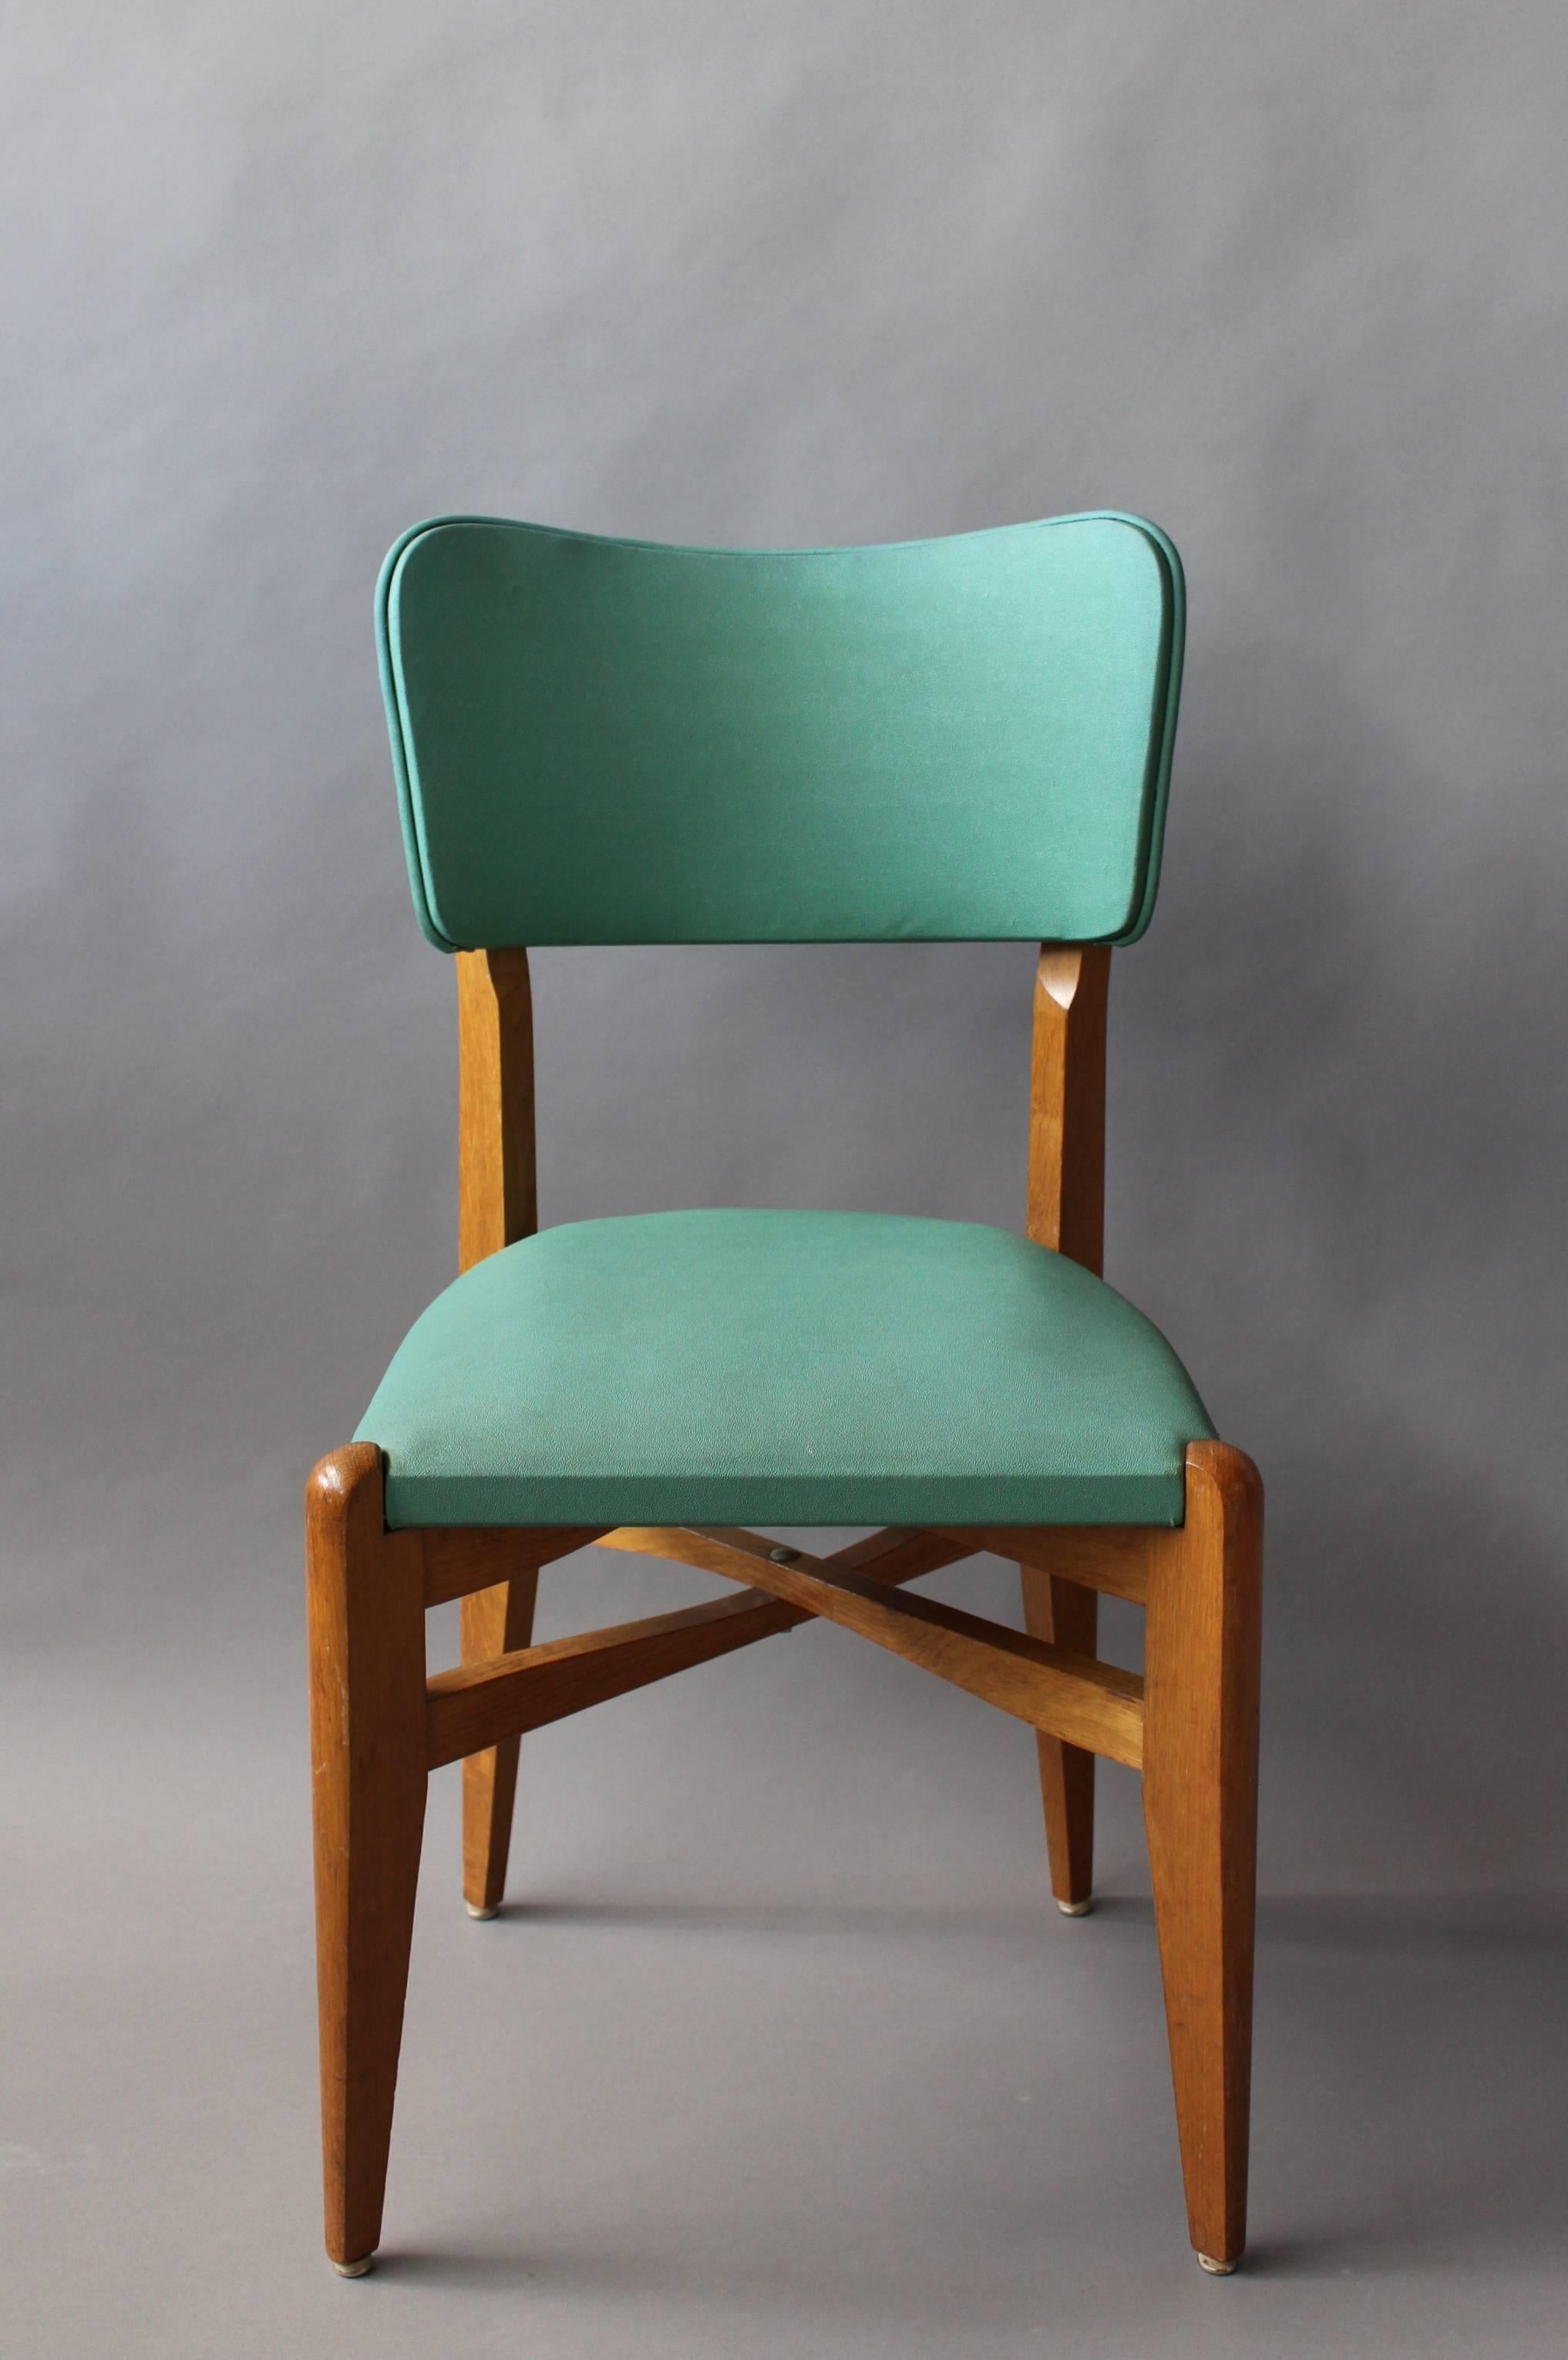 A set of 6 French 1950s green vinyl upholstered oak chairs.